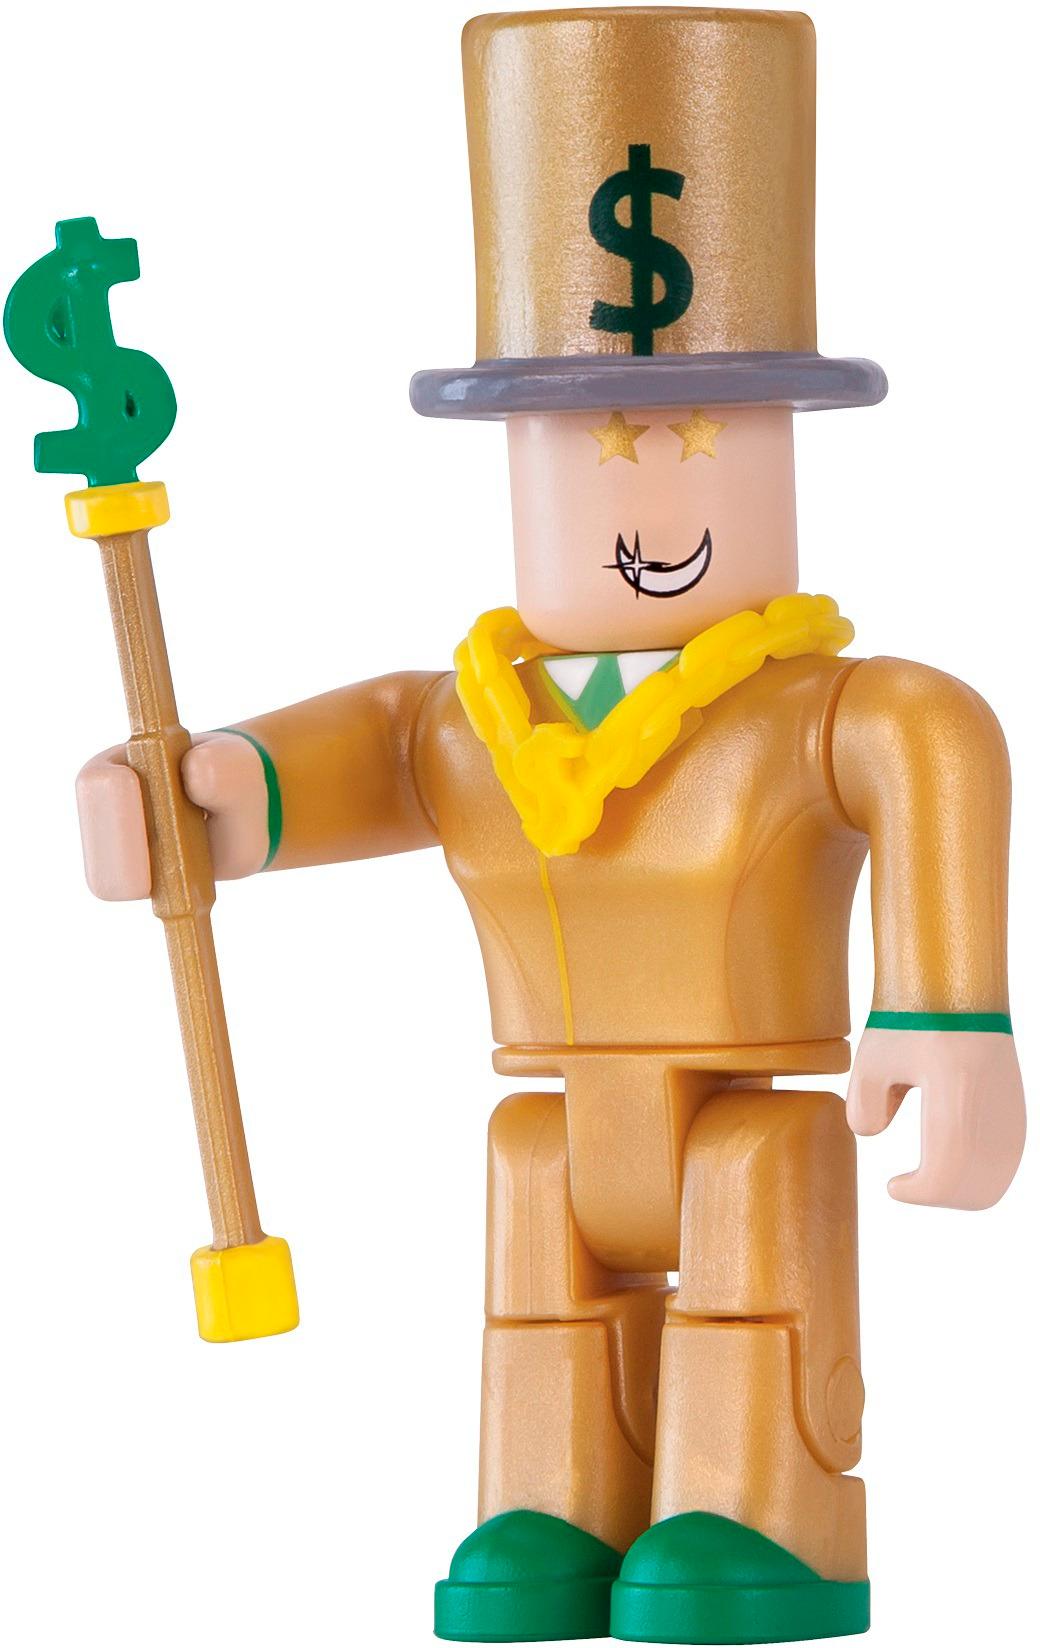 Customer Reviews Roblox Core Figure Styles May Vary 10705 Best Buy - customer reviews roblox core figure styles may vary 10705 best buy